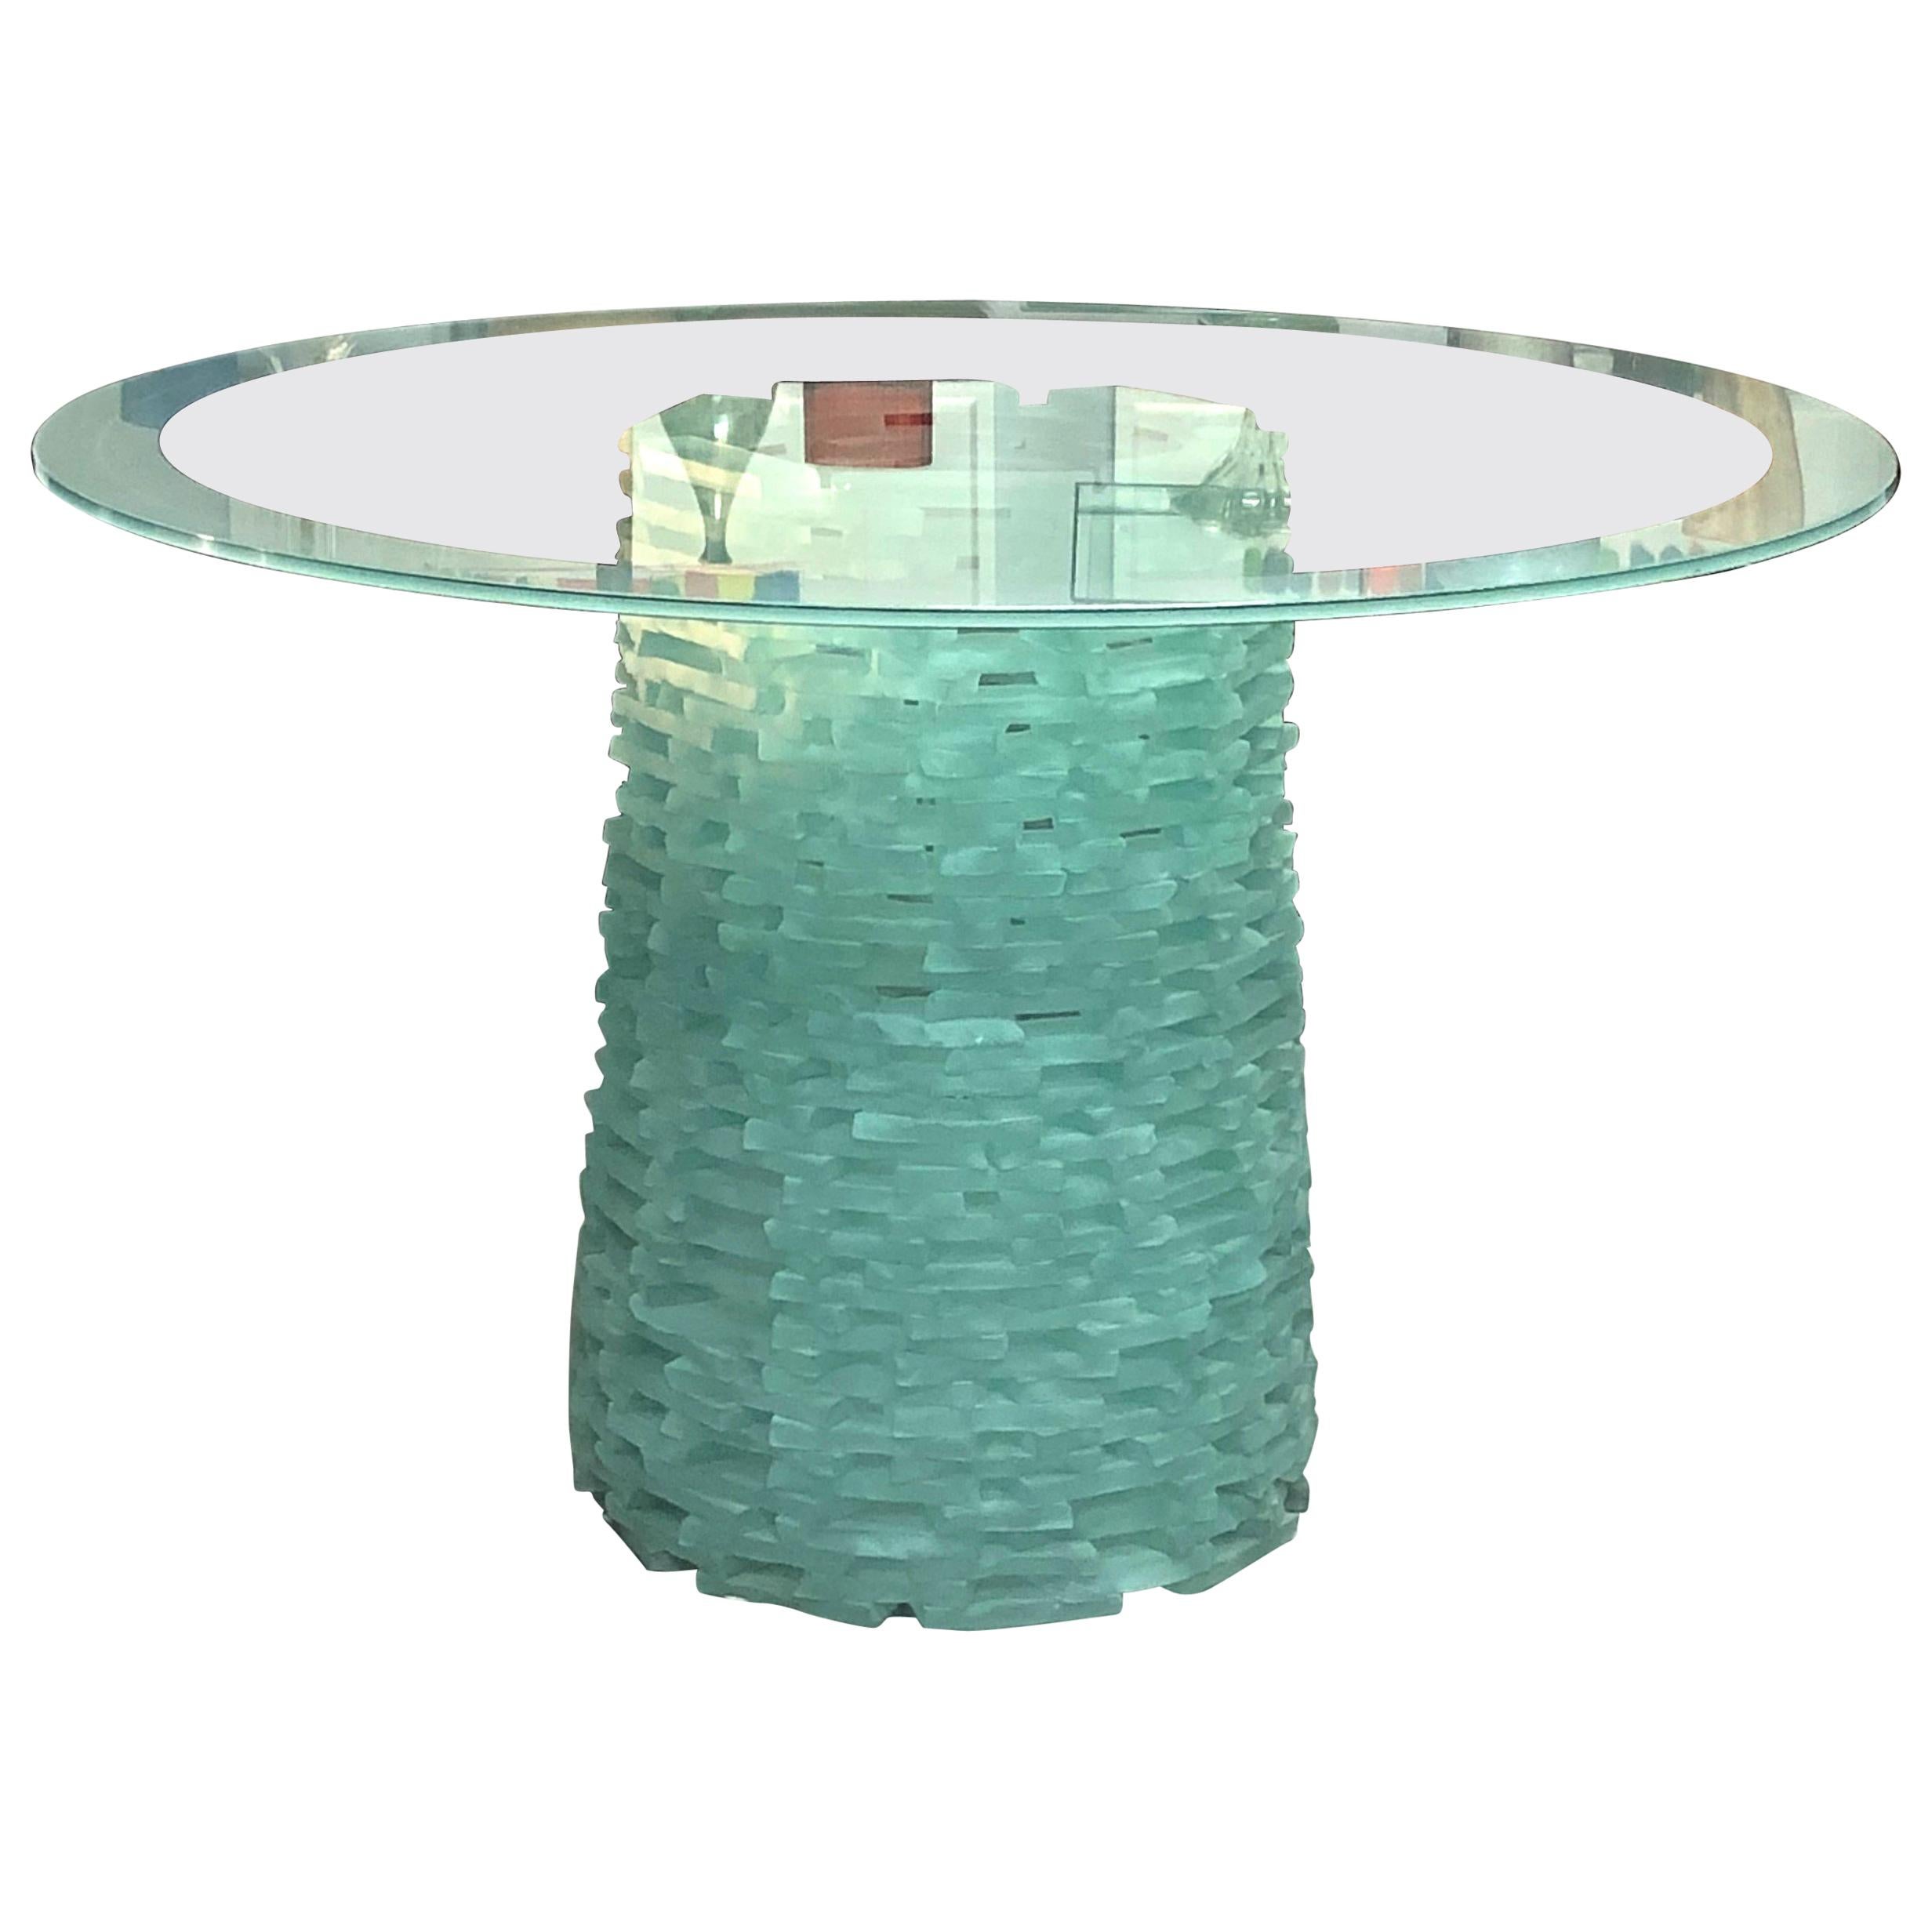 Murano Stacked Glass Modern Round Dining Table, 1980s